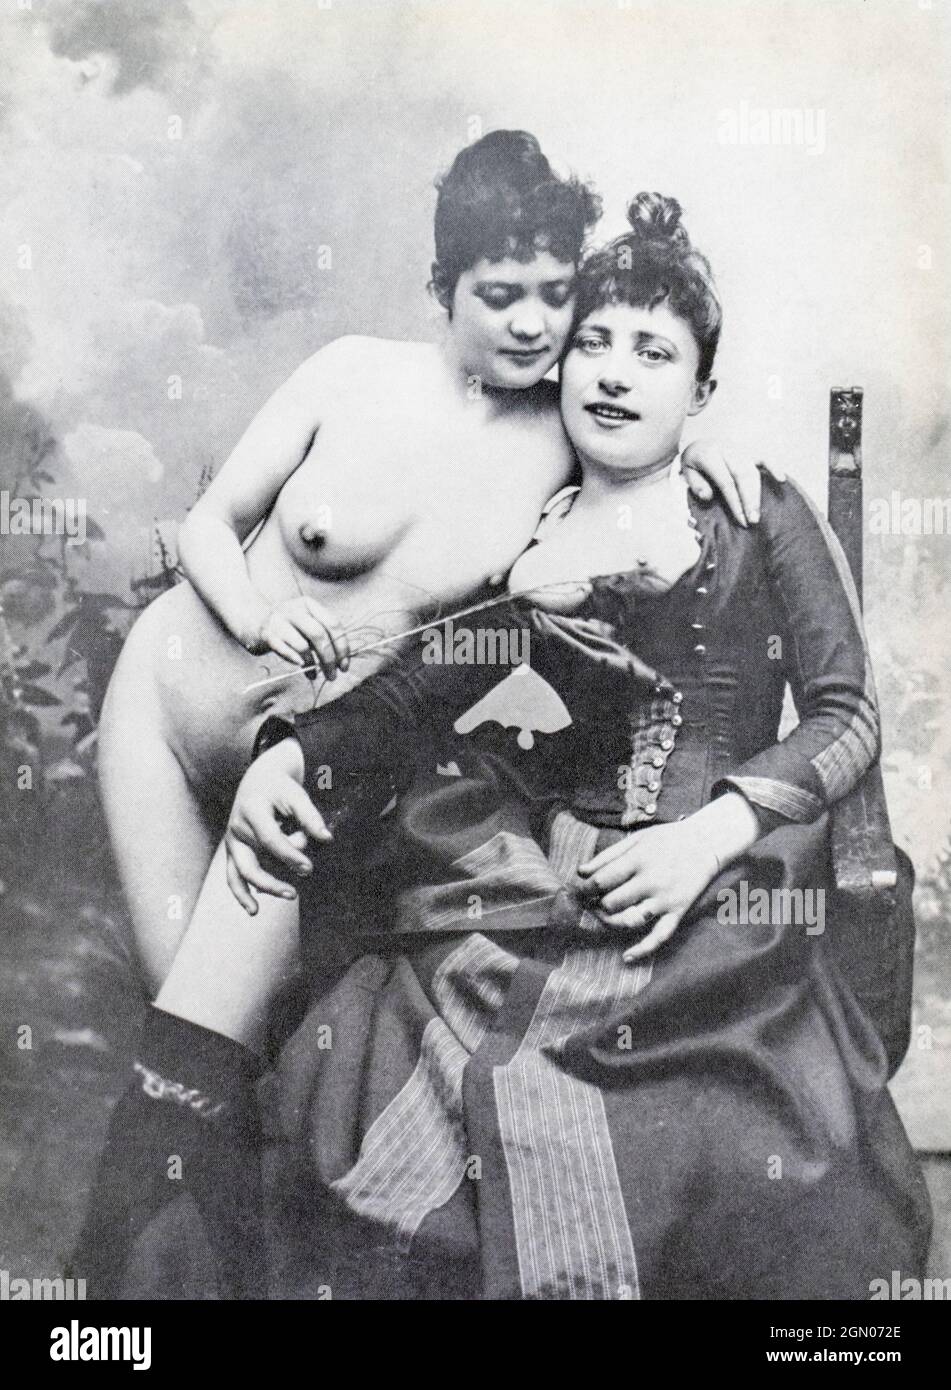 La Goulue (seated) and her sister.  La Goulue, stage name for Louise Weber, 1866 - 1929, French can-can dancer at the Moulin Rouge, who featured in Toulouse-Lautrec's portraits and posters. She was known as the Queen of Montmartre. Stock Photo